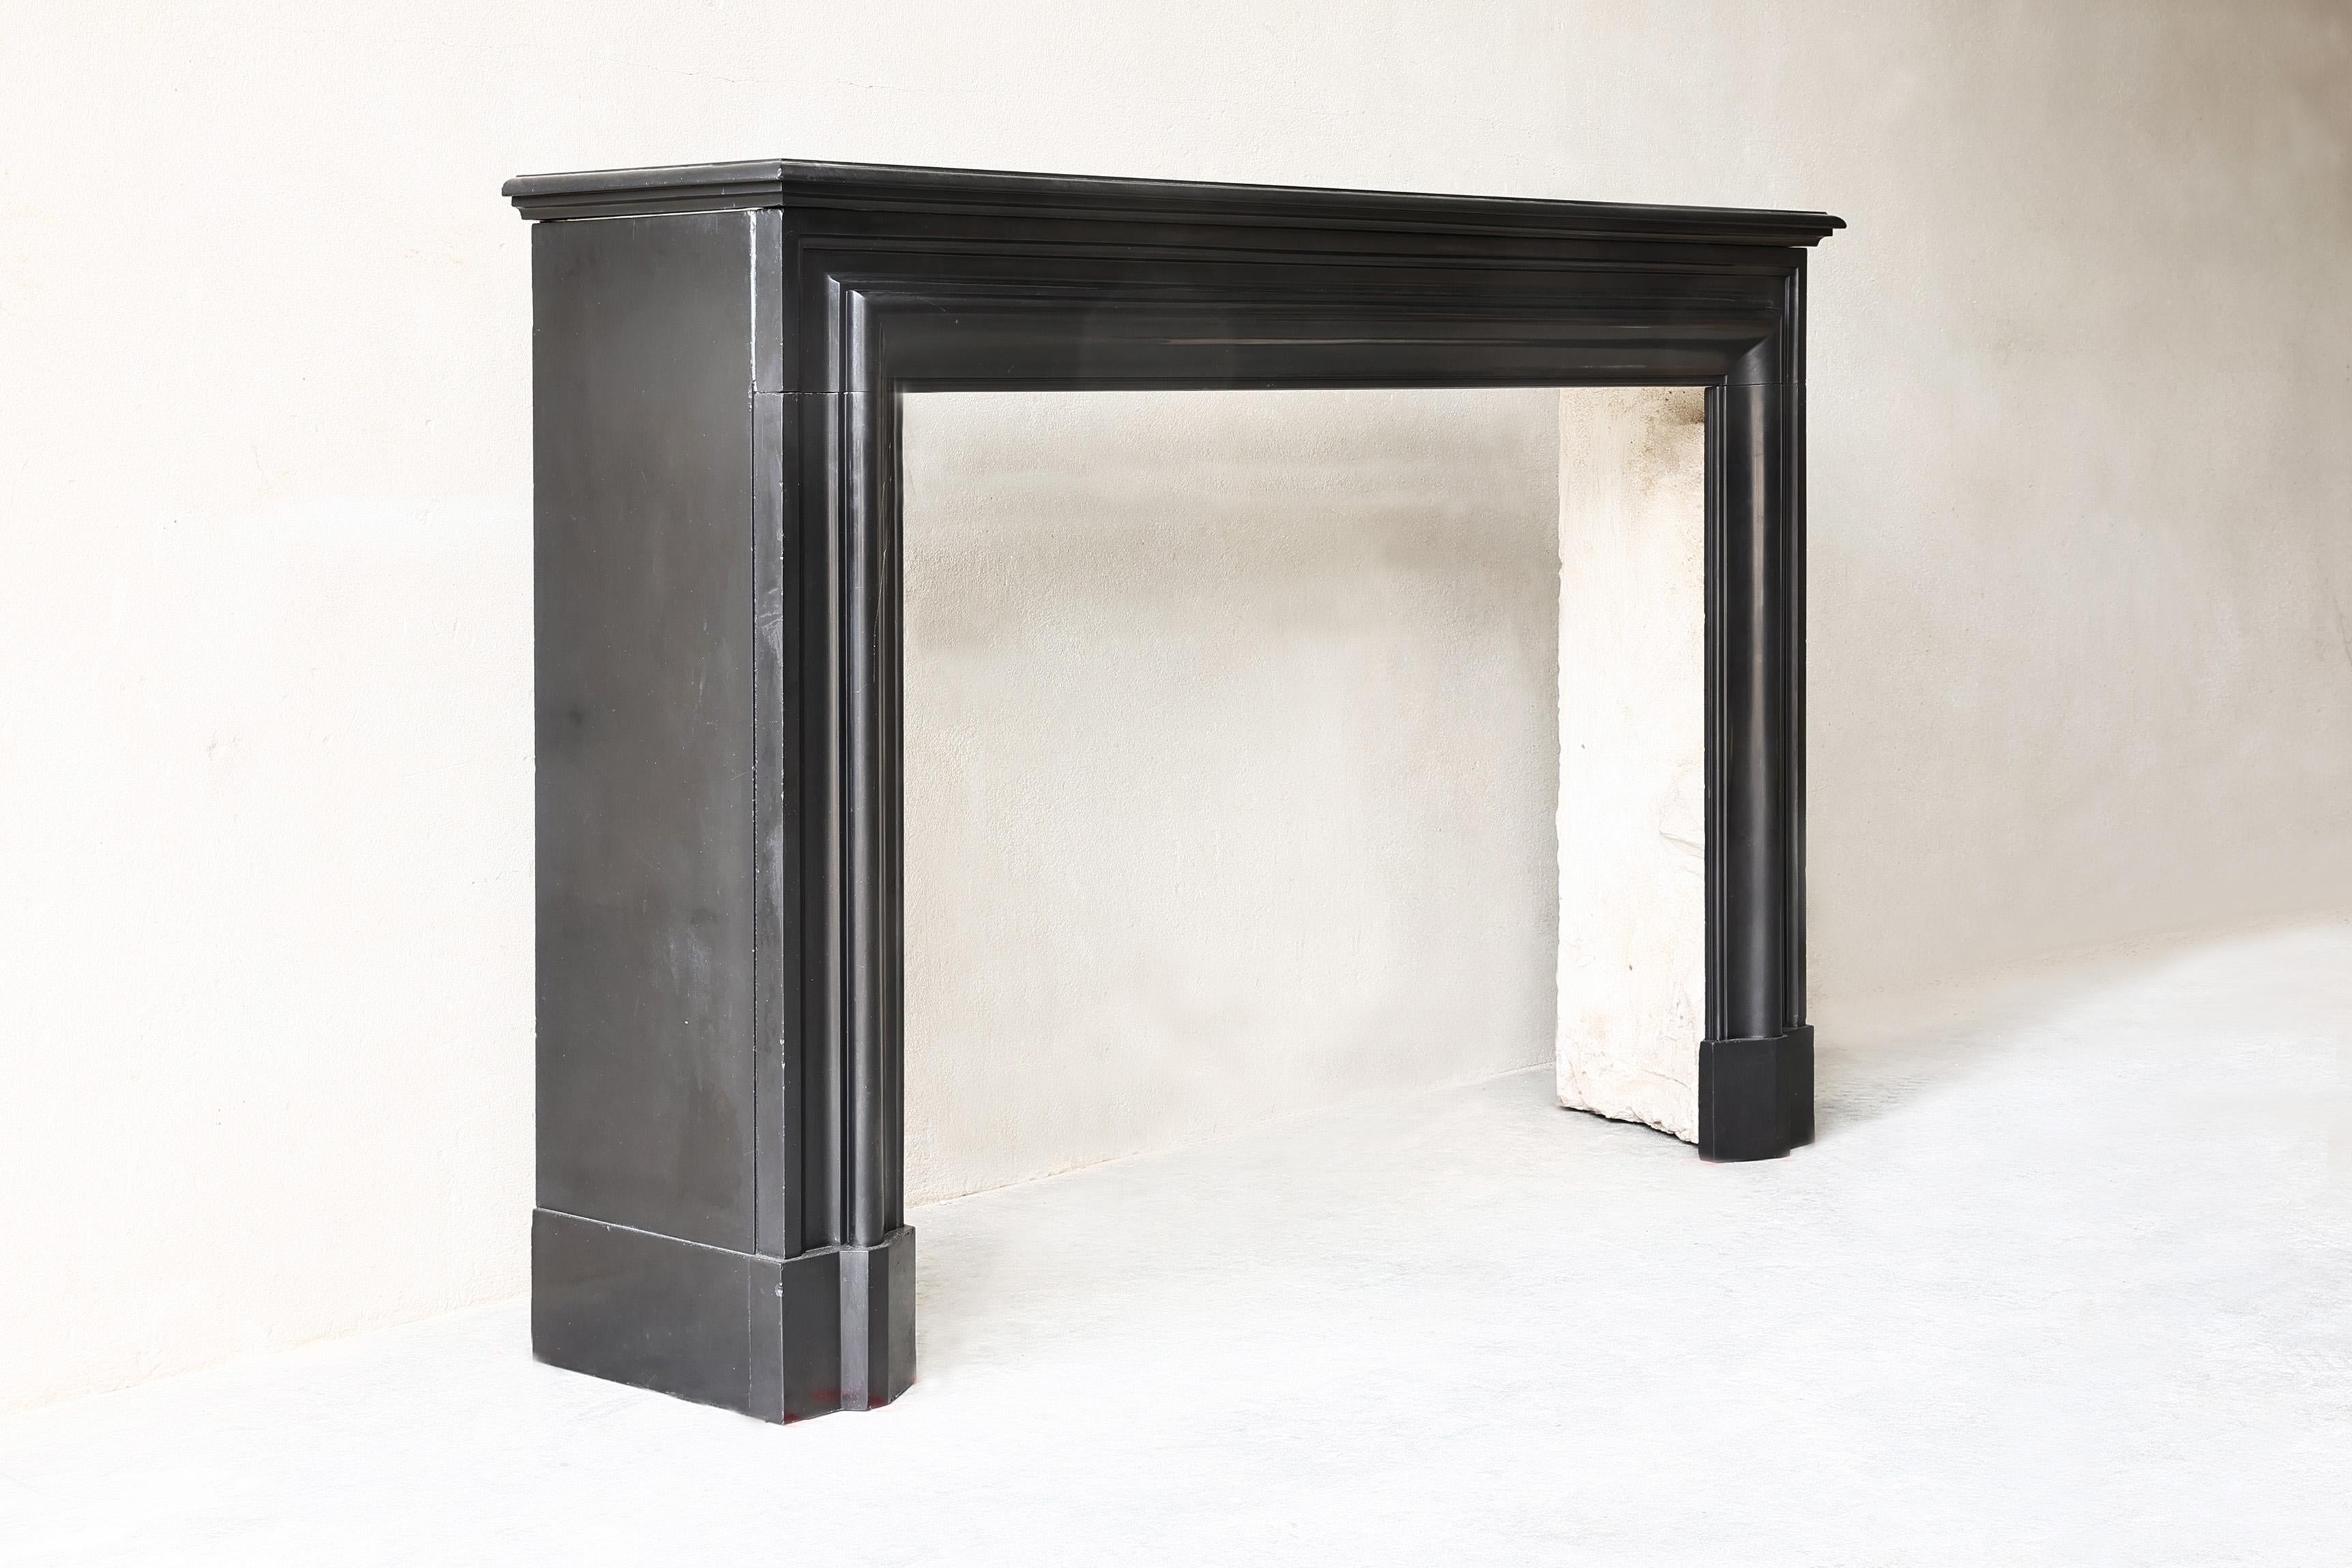 Beautiful antique mantelpiece made of black marble, called Noir de Mazy. This beautiful type of marble comes from Belgium, but is becoming increasingly rare, because the quarries where this 'black gold' was extracted are now closed. This black